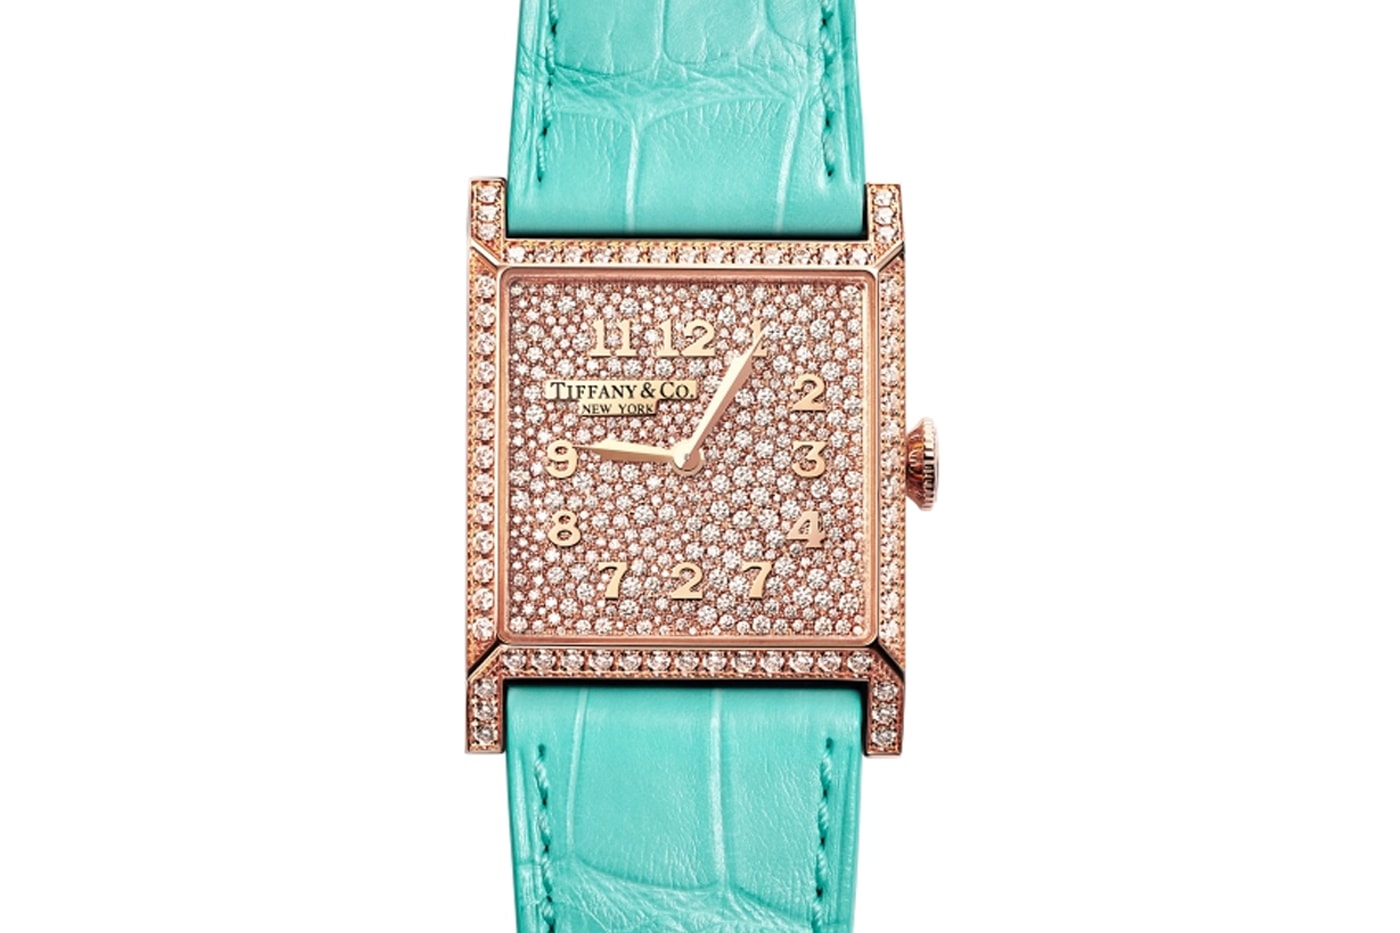 Tiffany & Co. unveils new design for the Tiffany ()